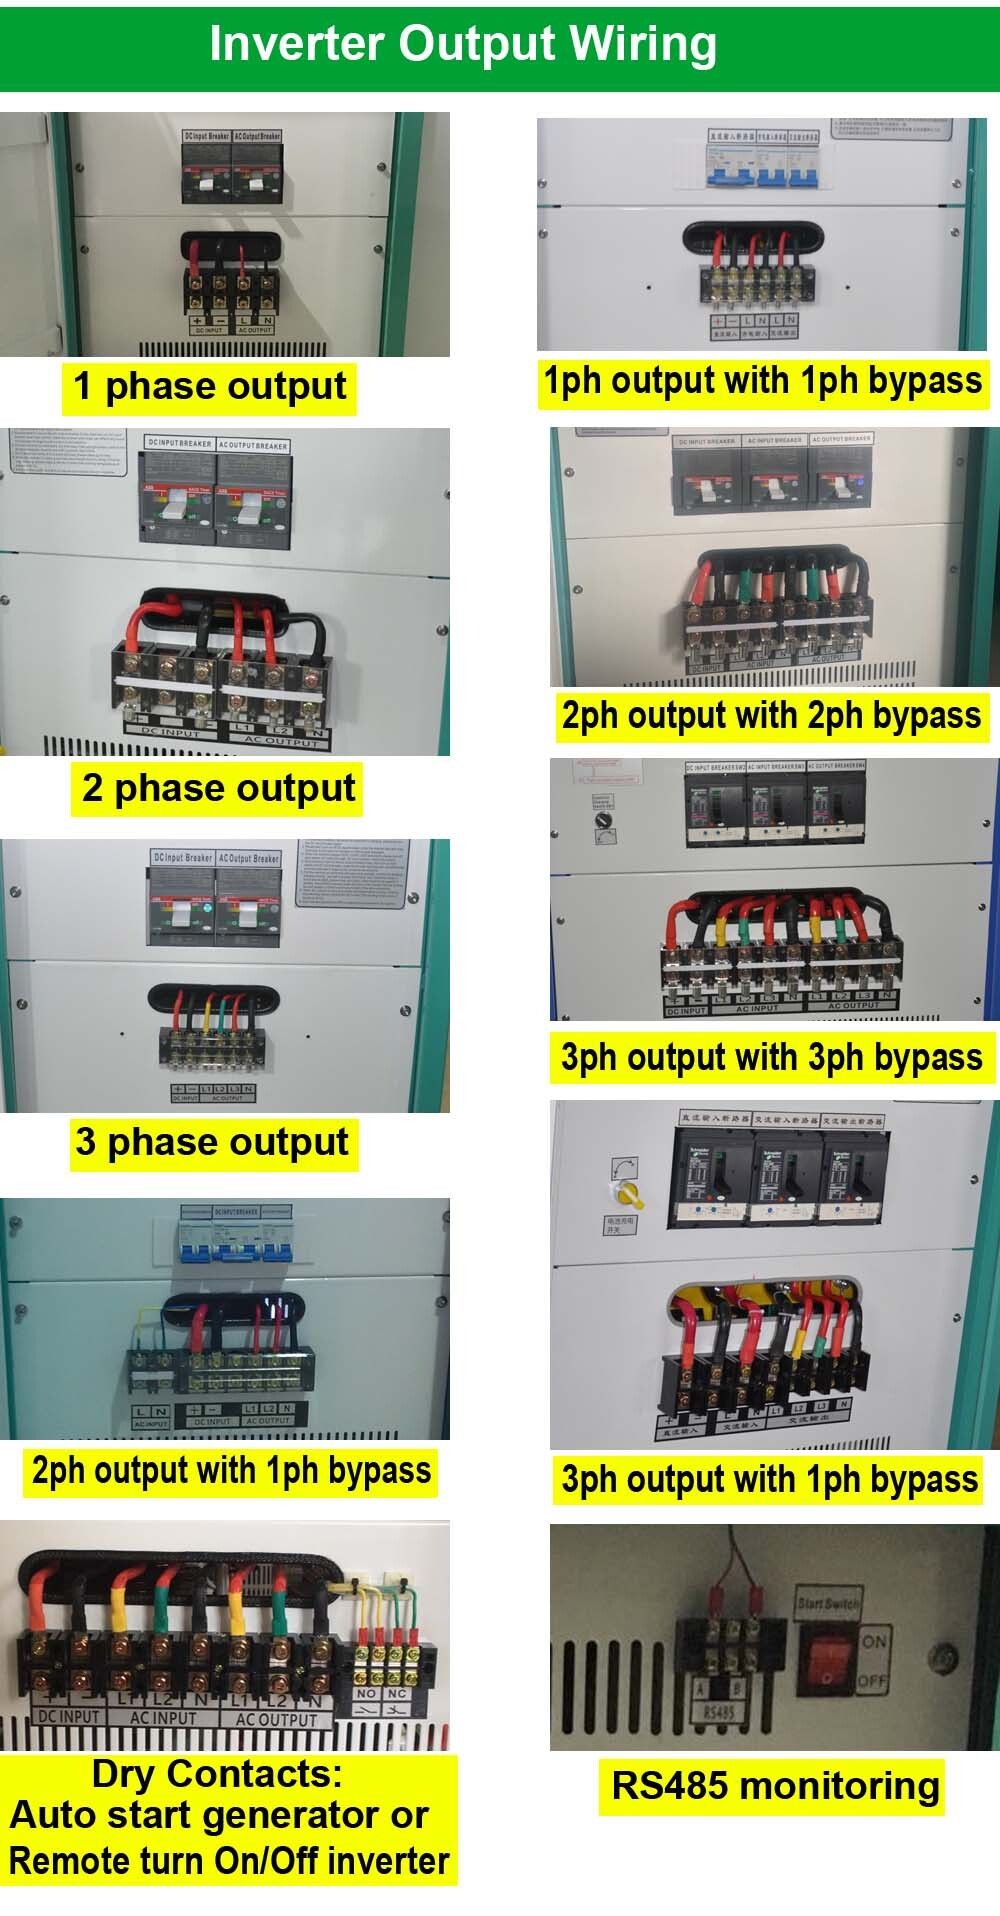 30kw 40kw All in One Solar Hybrid Inverter with Charge Controller 360V Battery Charging